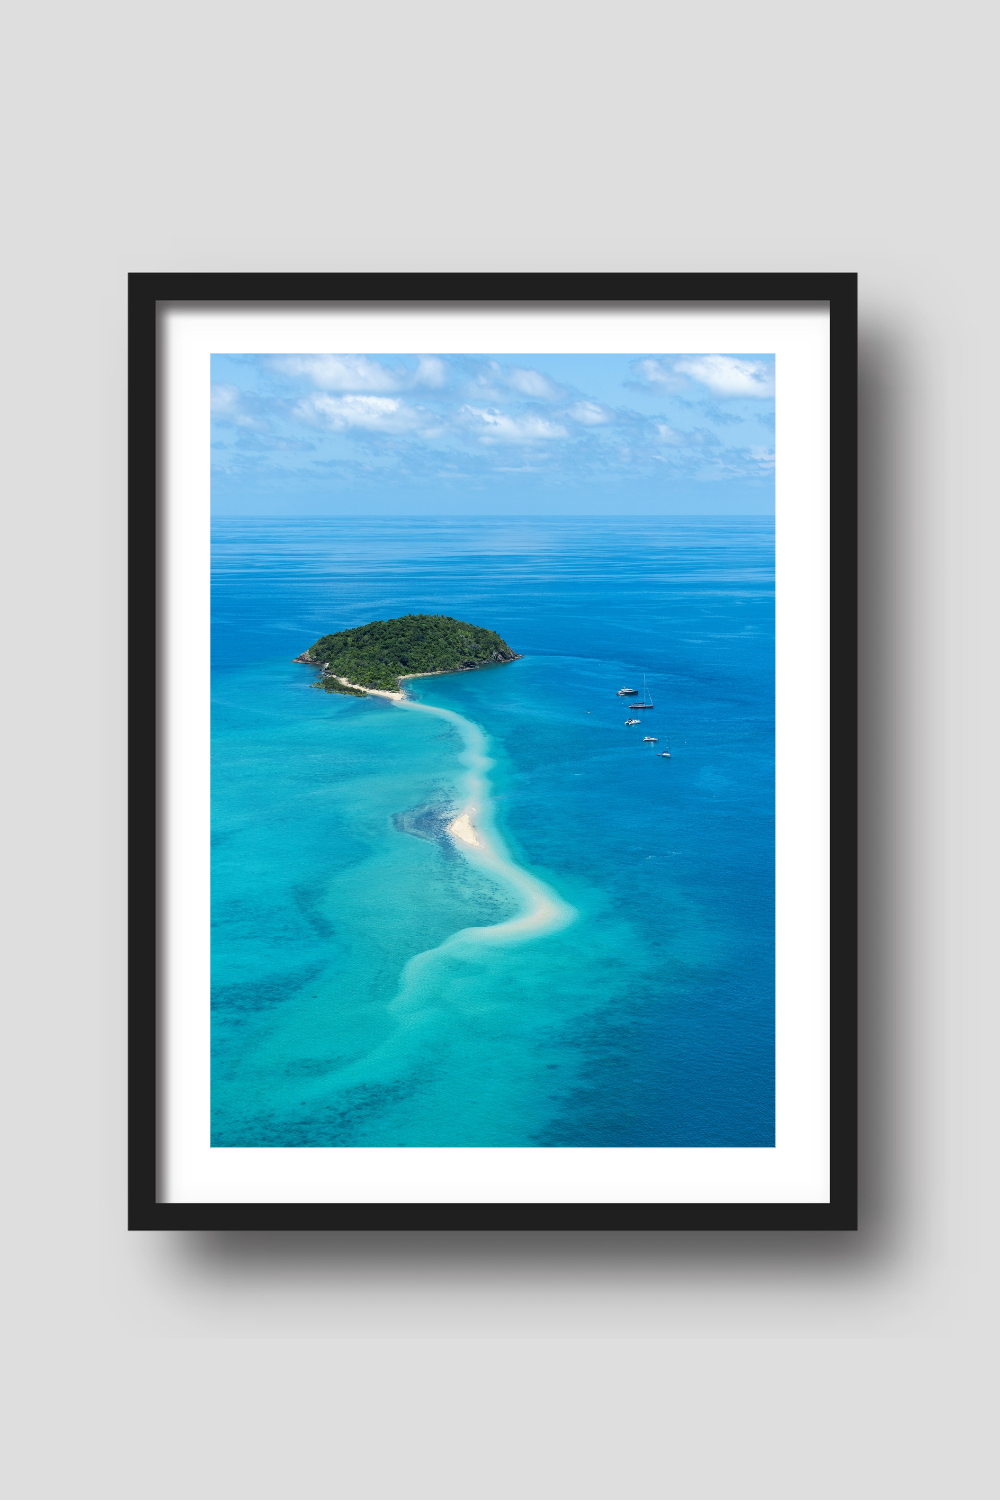 small island with sailing vessels anchored nearby a snaking sandbar through the turquiose waters